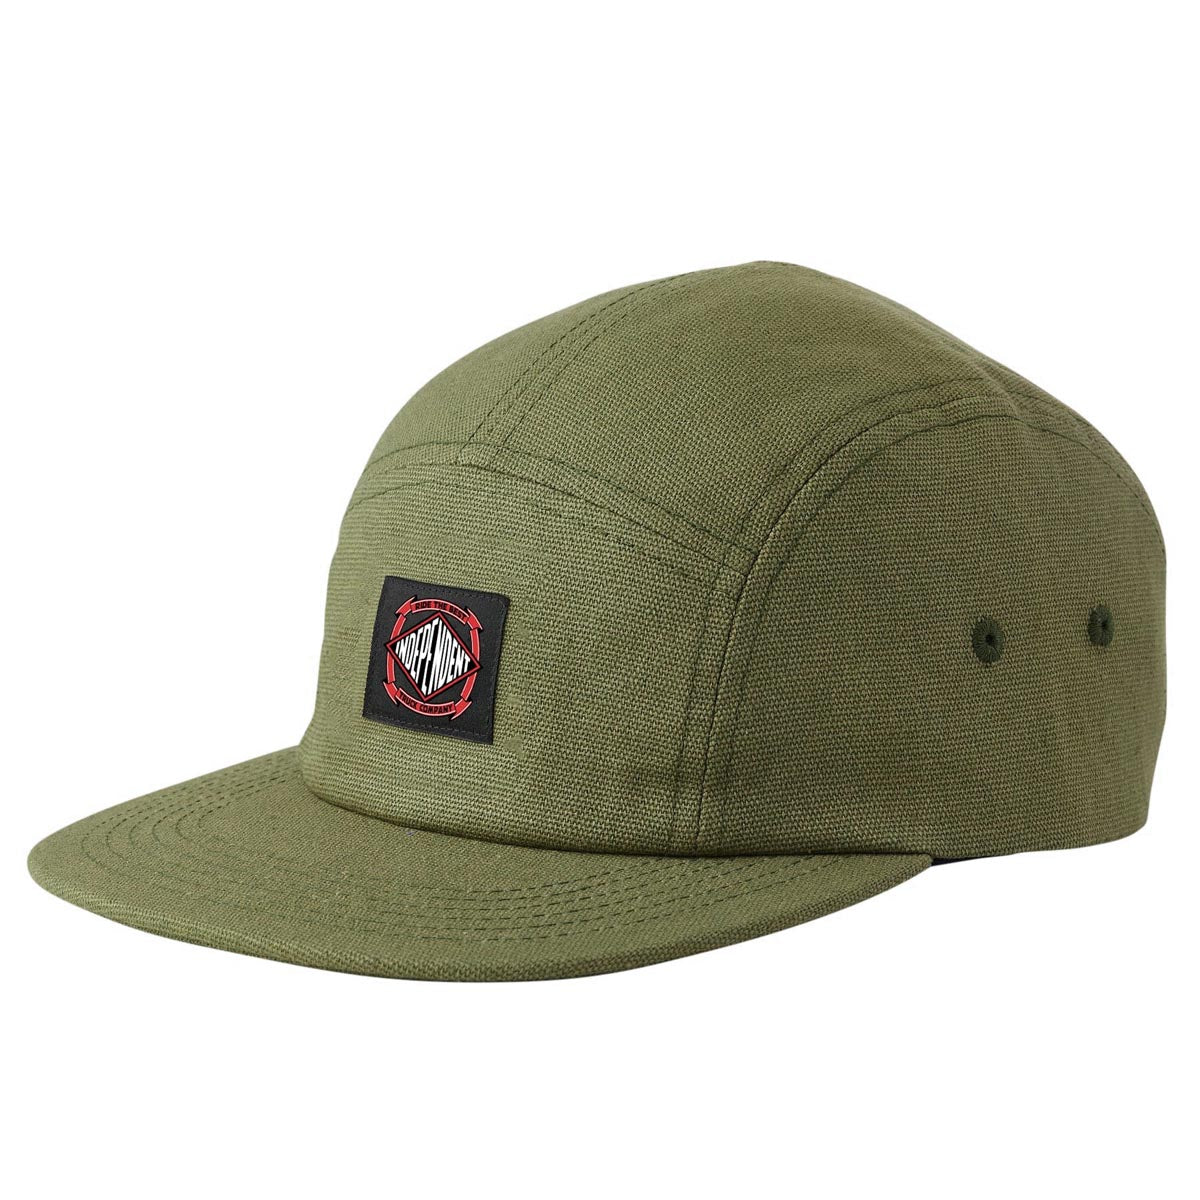 Independent Summit Scroll Camp Unstructured Hat - Army Green image 1